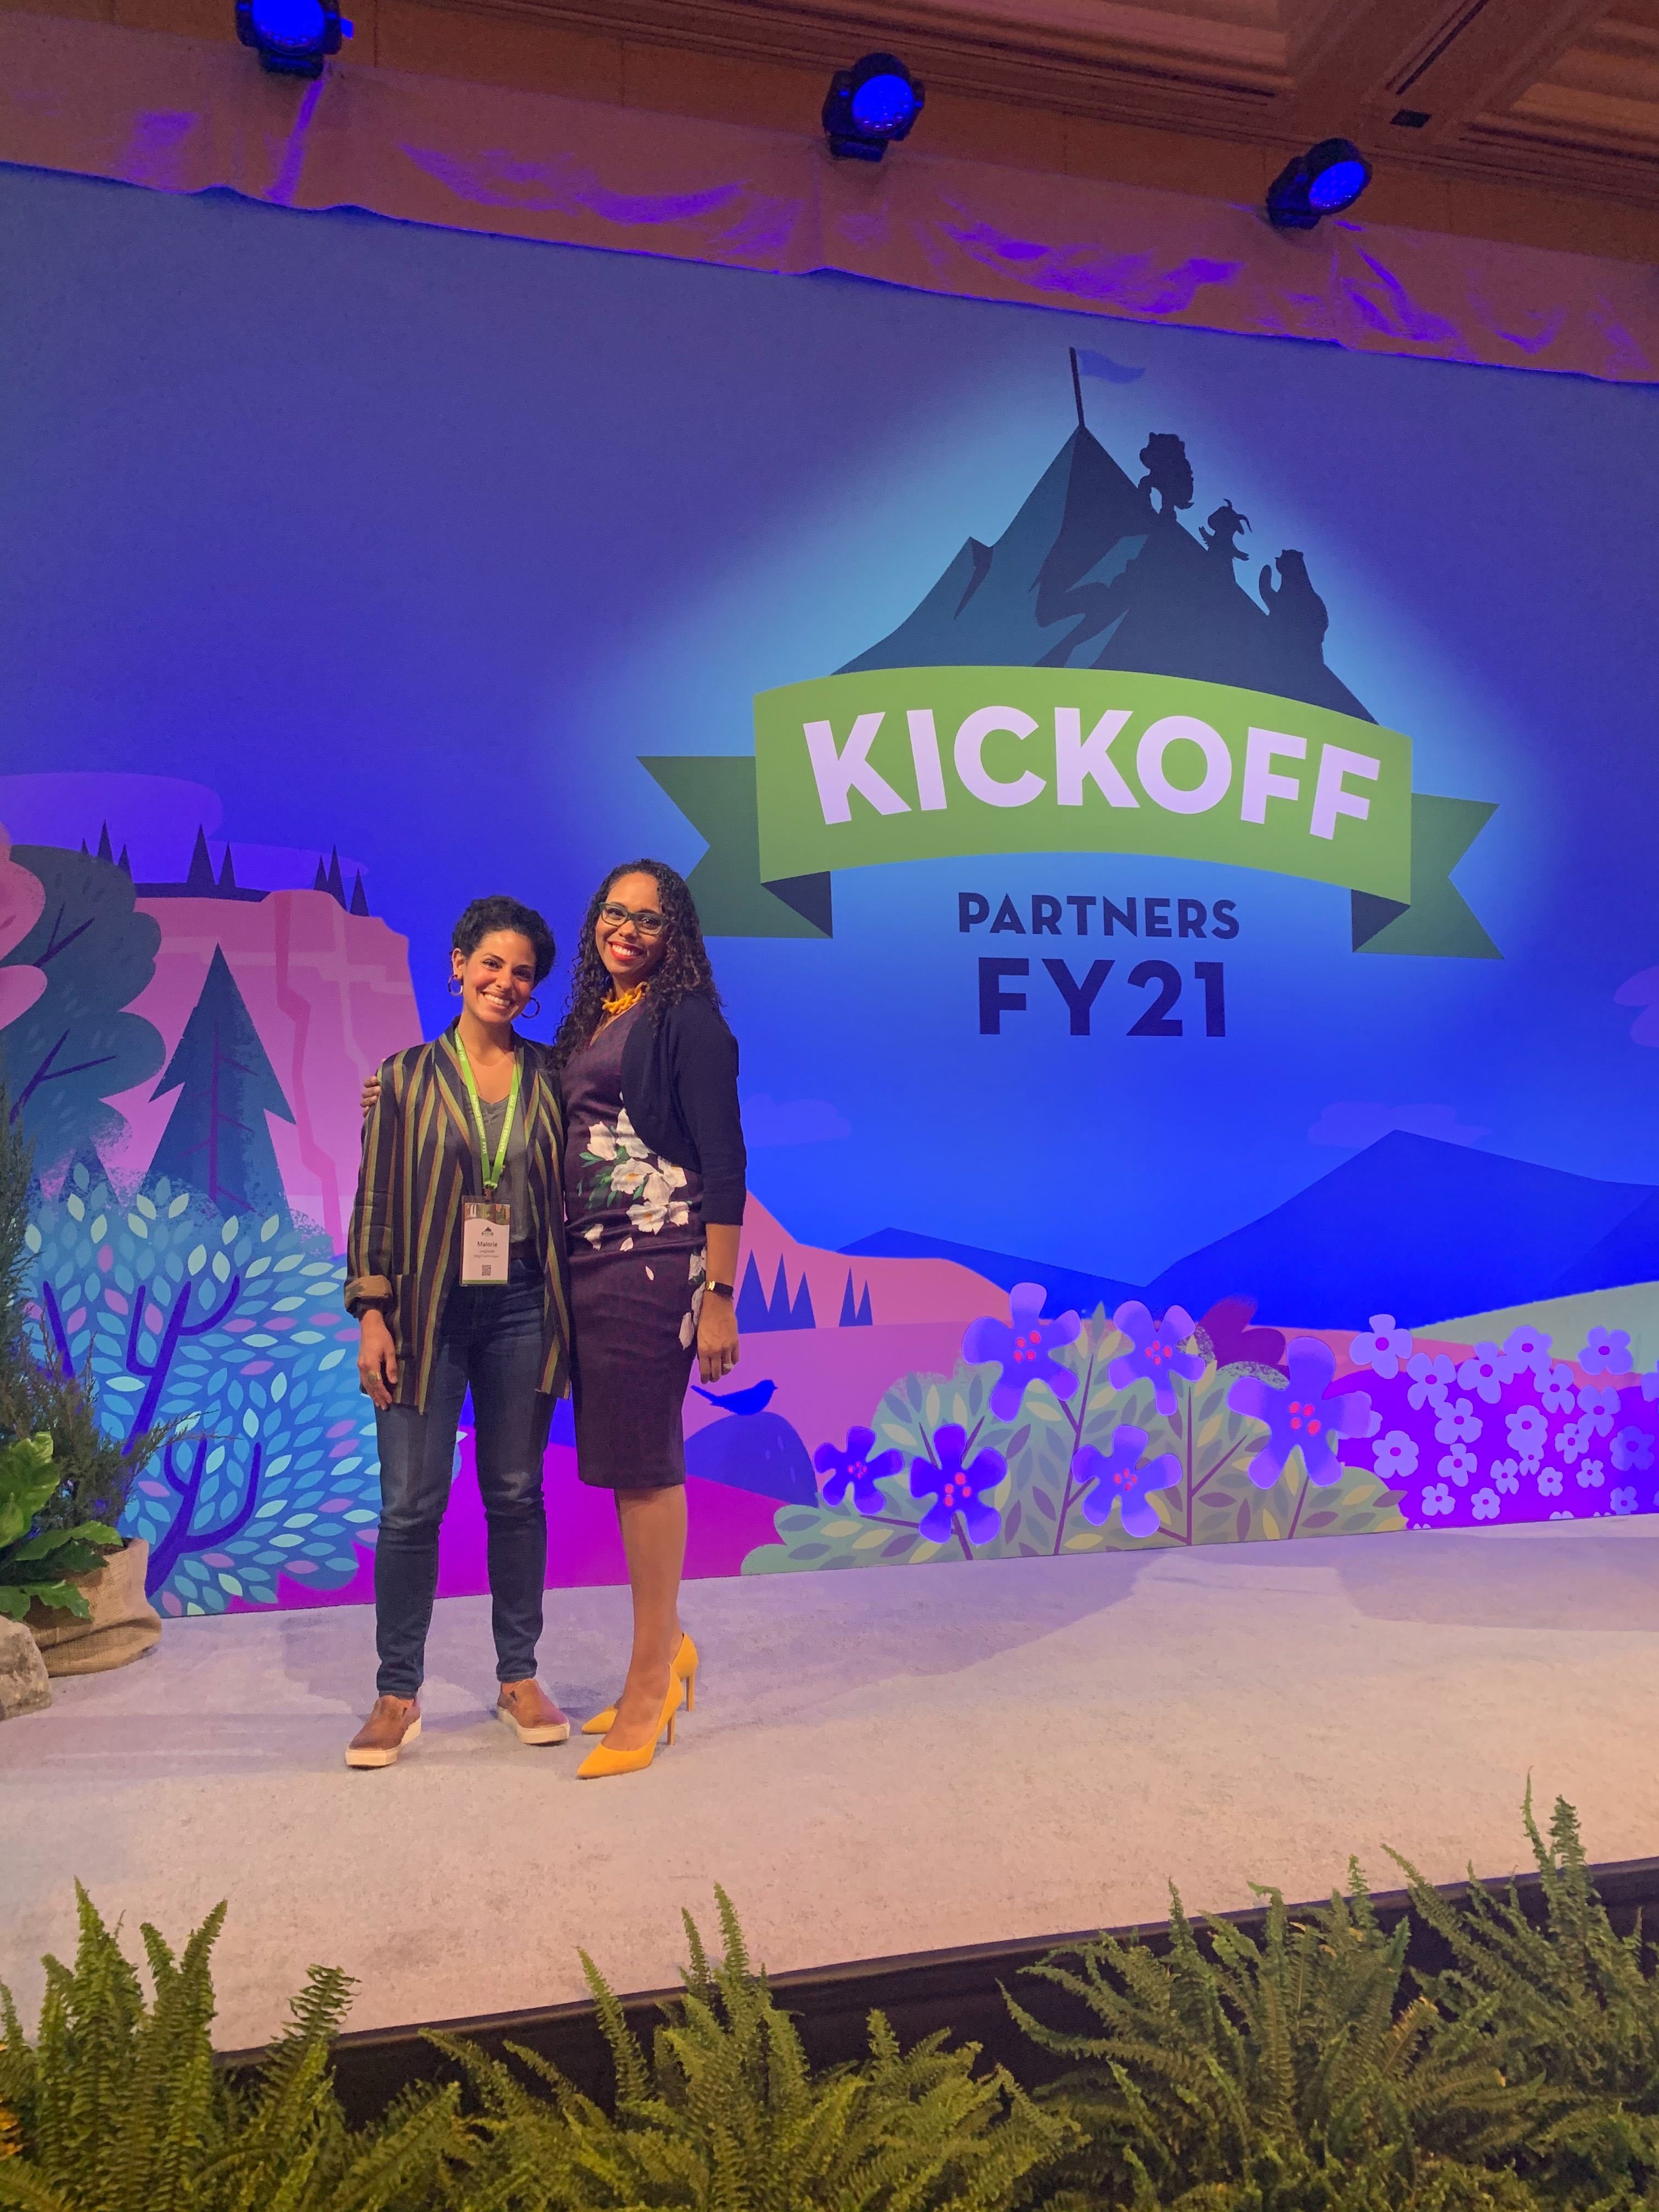 Salesforce Partner Kickoff interview about Exceeding Customers' Expectations on AppExchange